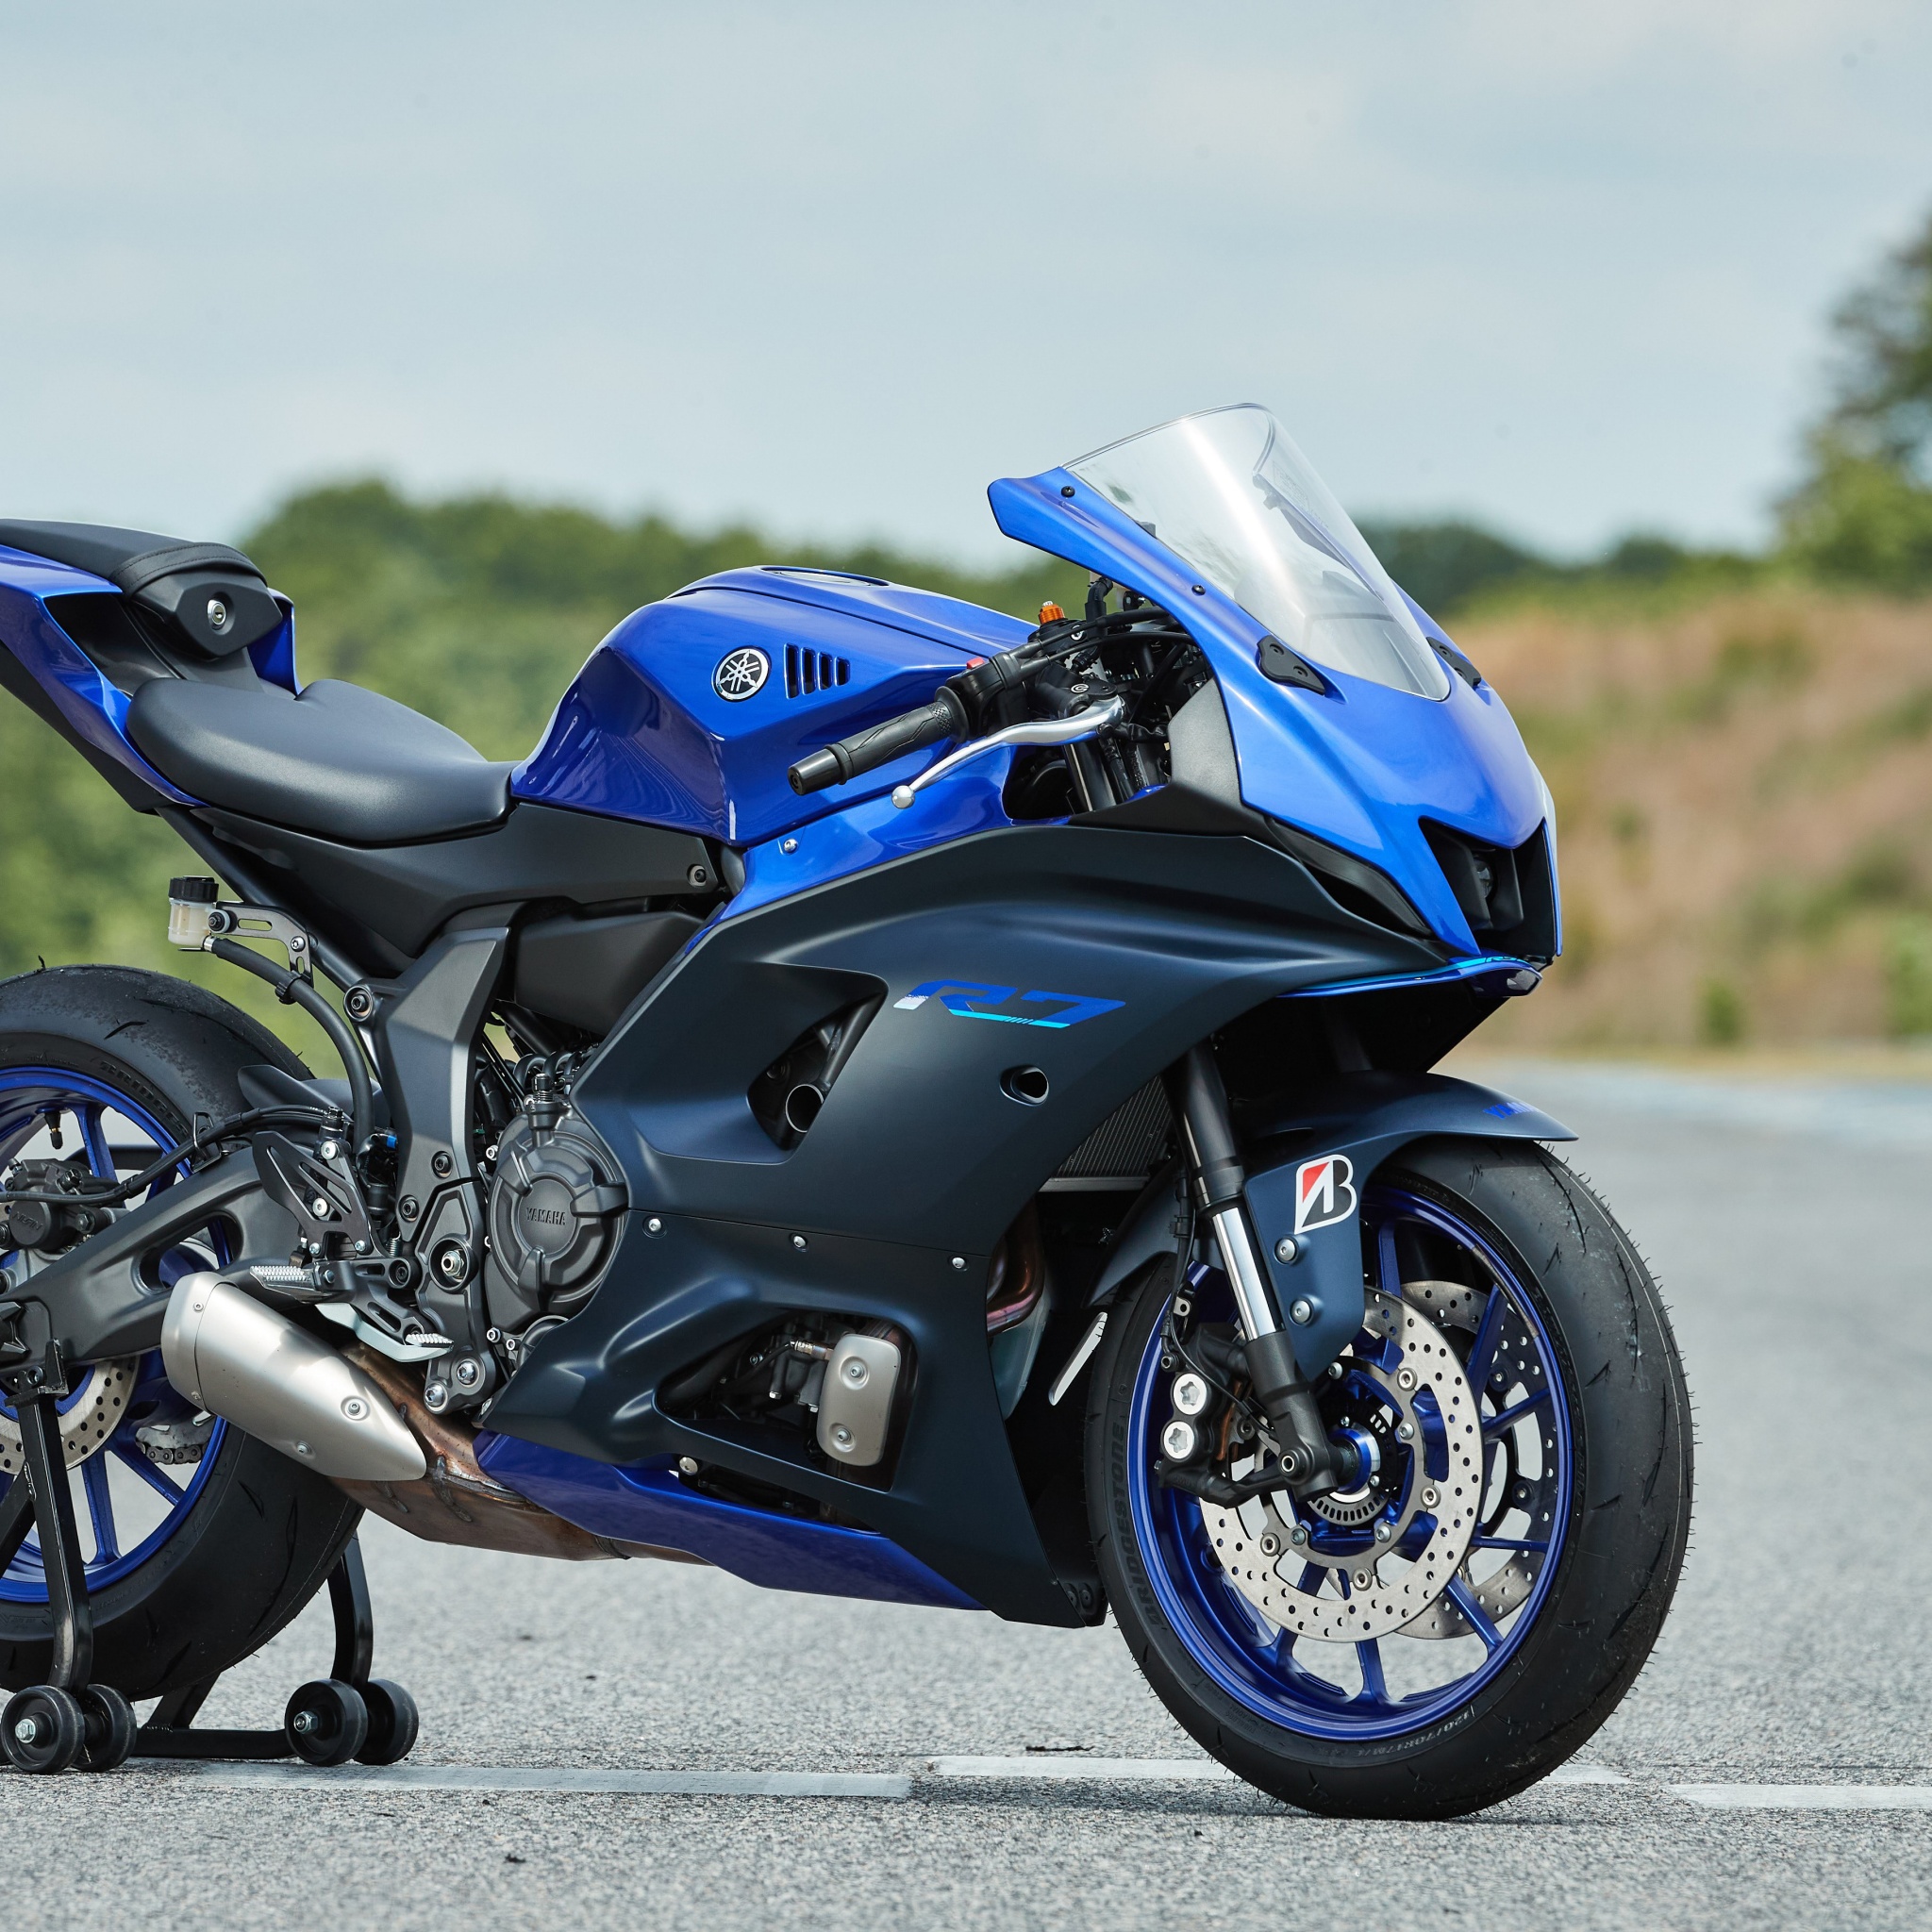 YZF-R7 Yamaha Wallpapers In Ultra HD